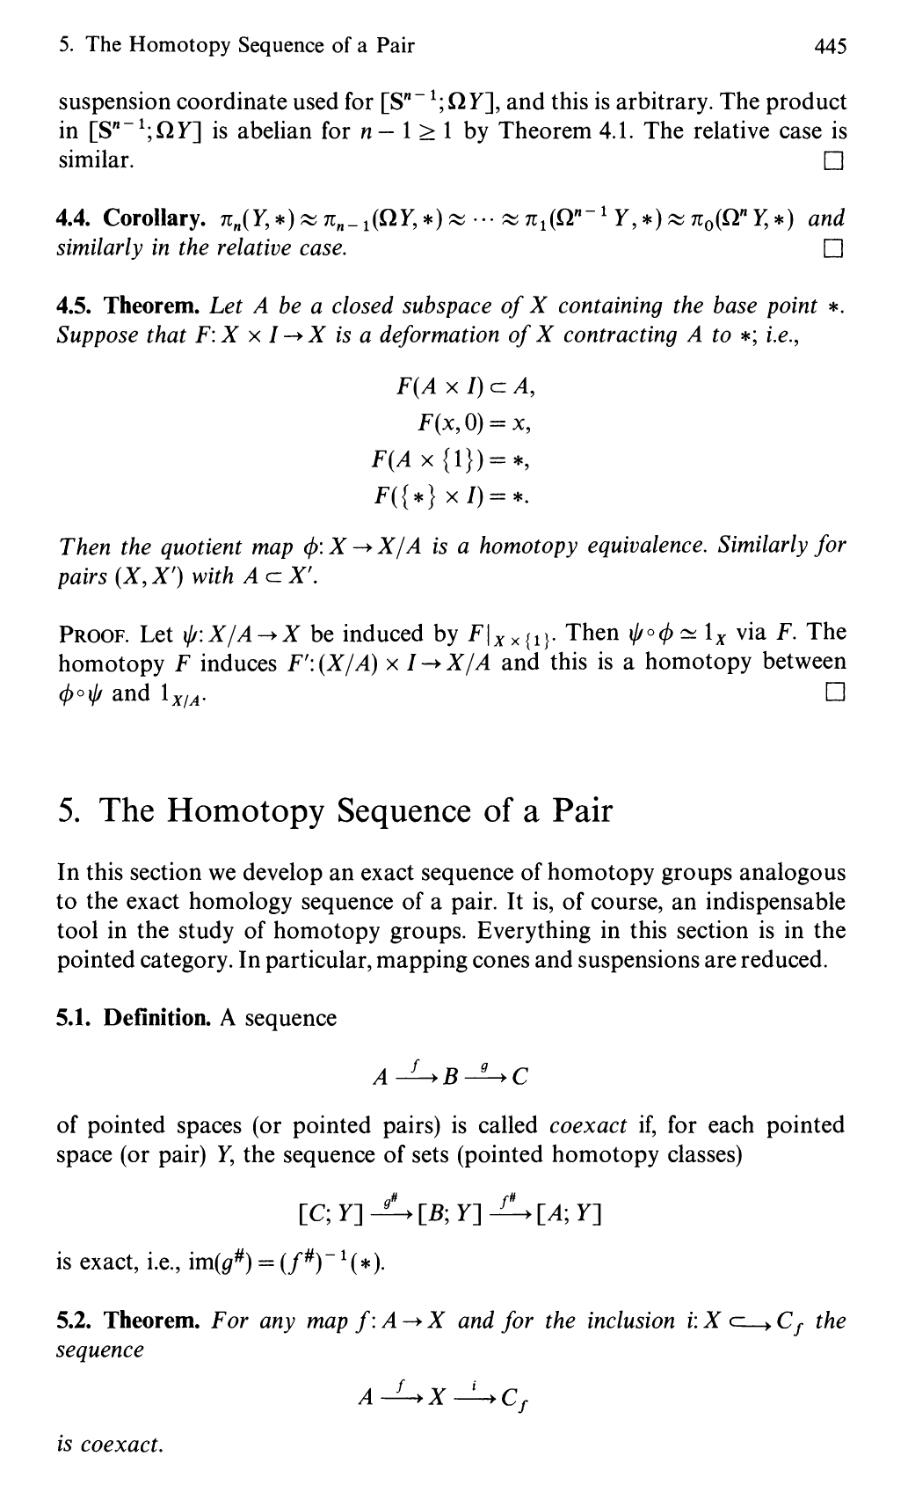 5. The Homotopy Sequence of a Pair